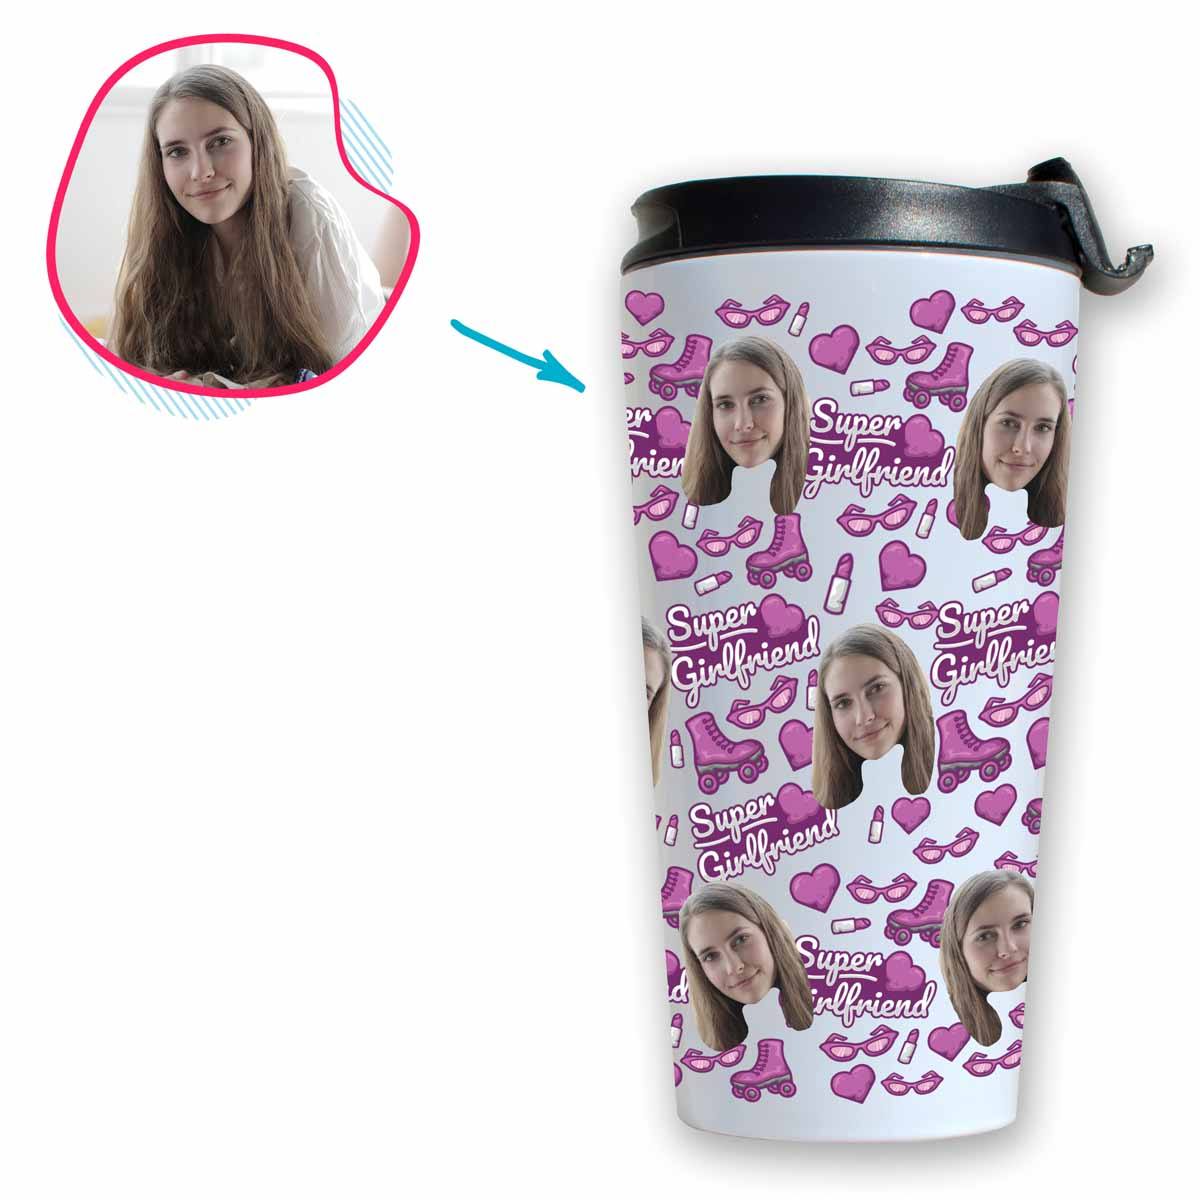 White Girlfriend personalized travel mug with photo of face printed on it